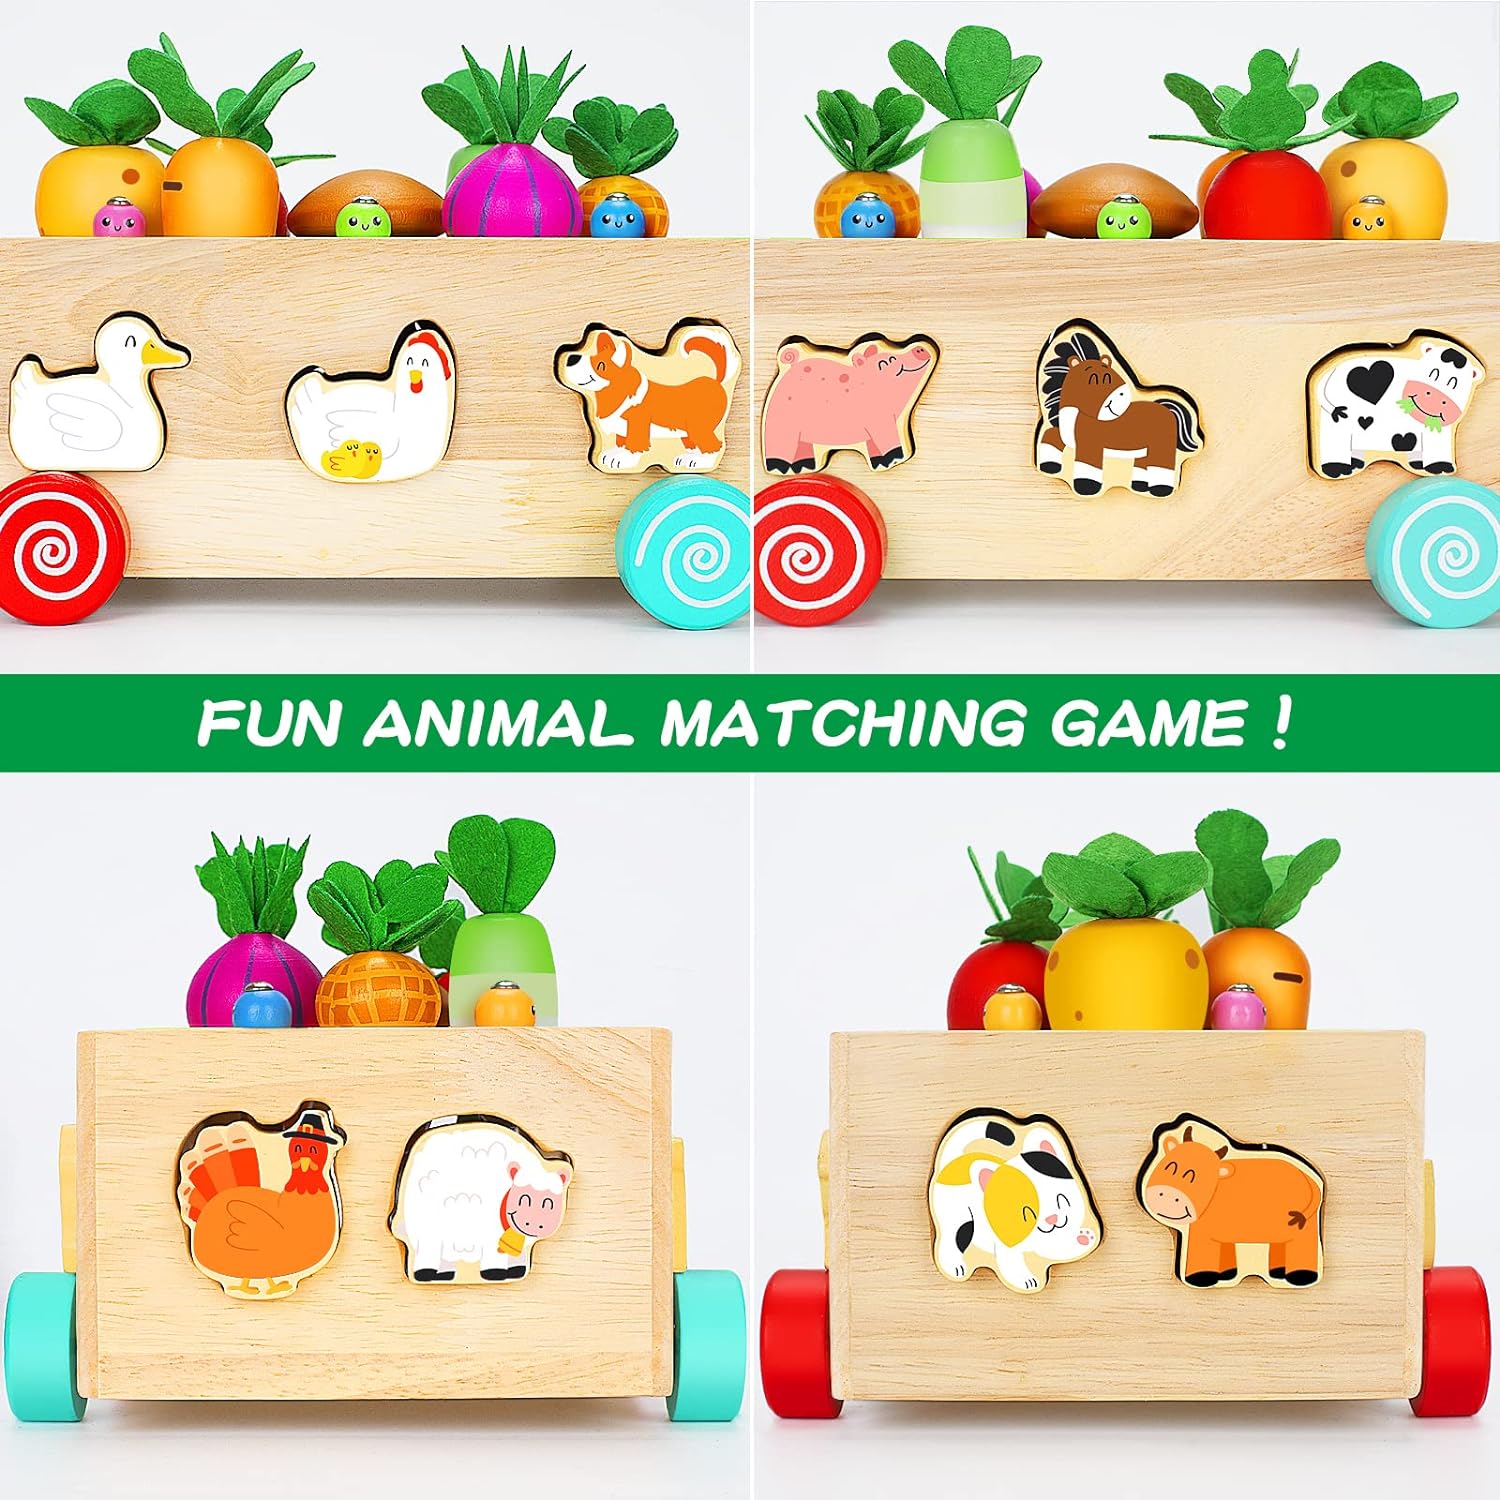 TKM Baby Wooden Montessori Toys For Toddlers Girl And Boy, Wooden Farm Animals  Toys Gifts For